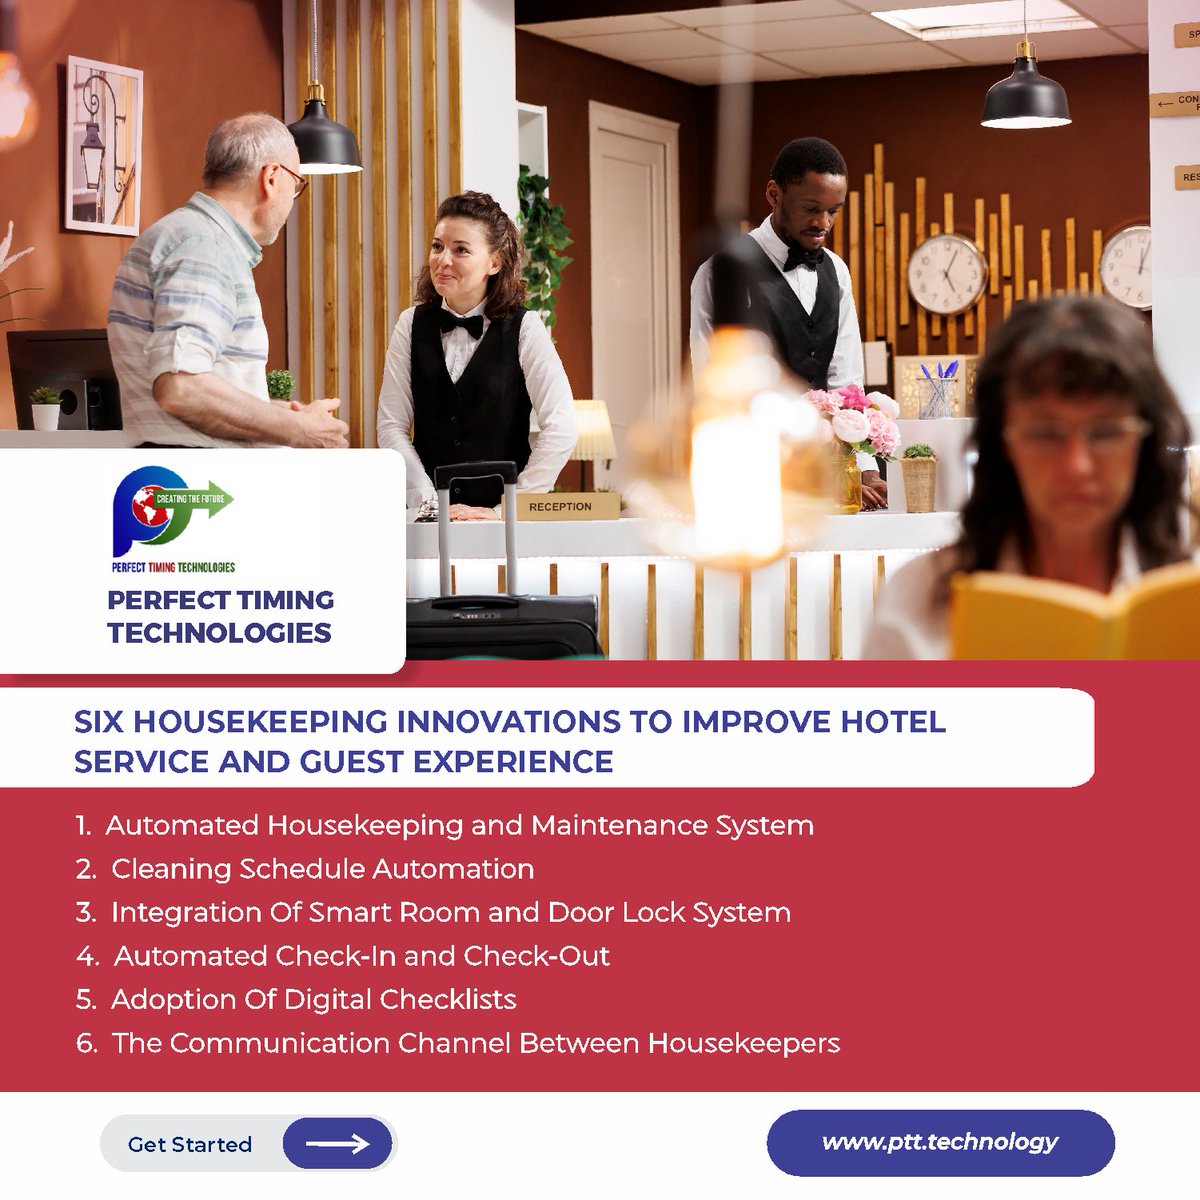 Six Housekeeping Innovations to Improve Hotel Service and Guest Experience

Read Here: 10xds.com/blog/housekeep…

#HospitalityInnovation #HotelService #GuestExperience #HousekeepingInnovations #PerfectTimingTechnologies #PerfectTimingHolding #TechInHospitality #GuestSatisfaction